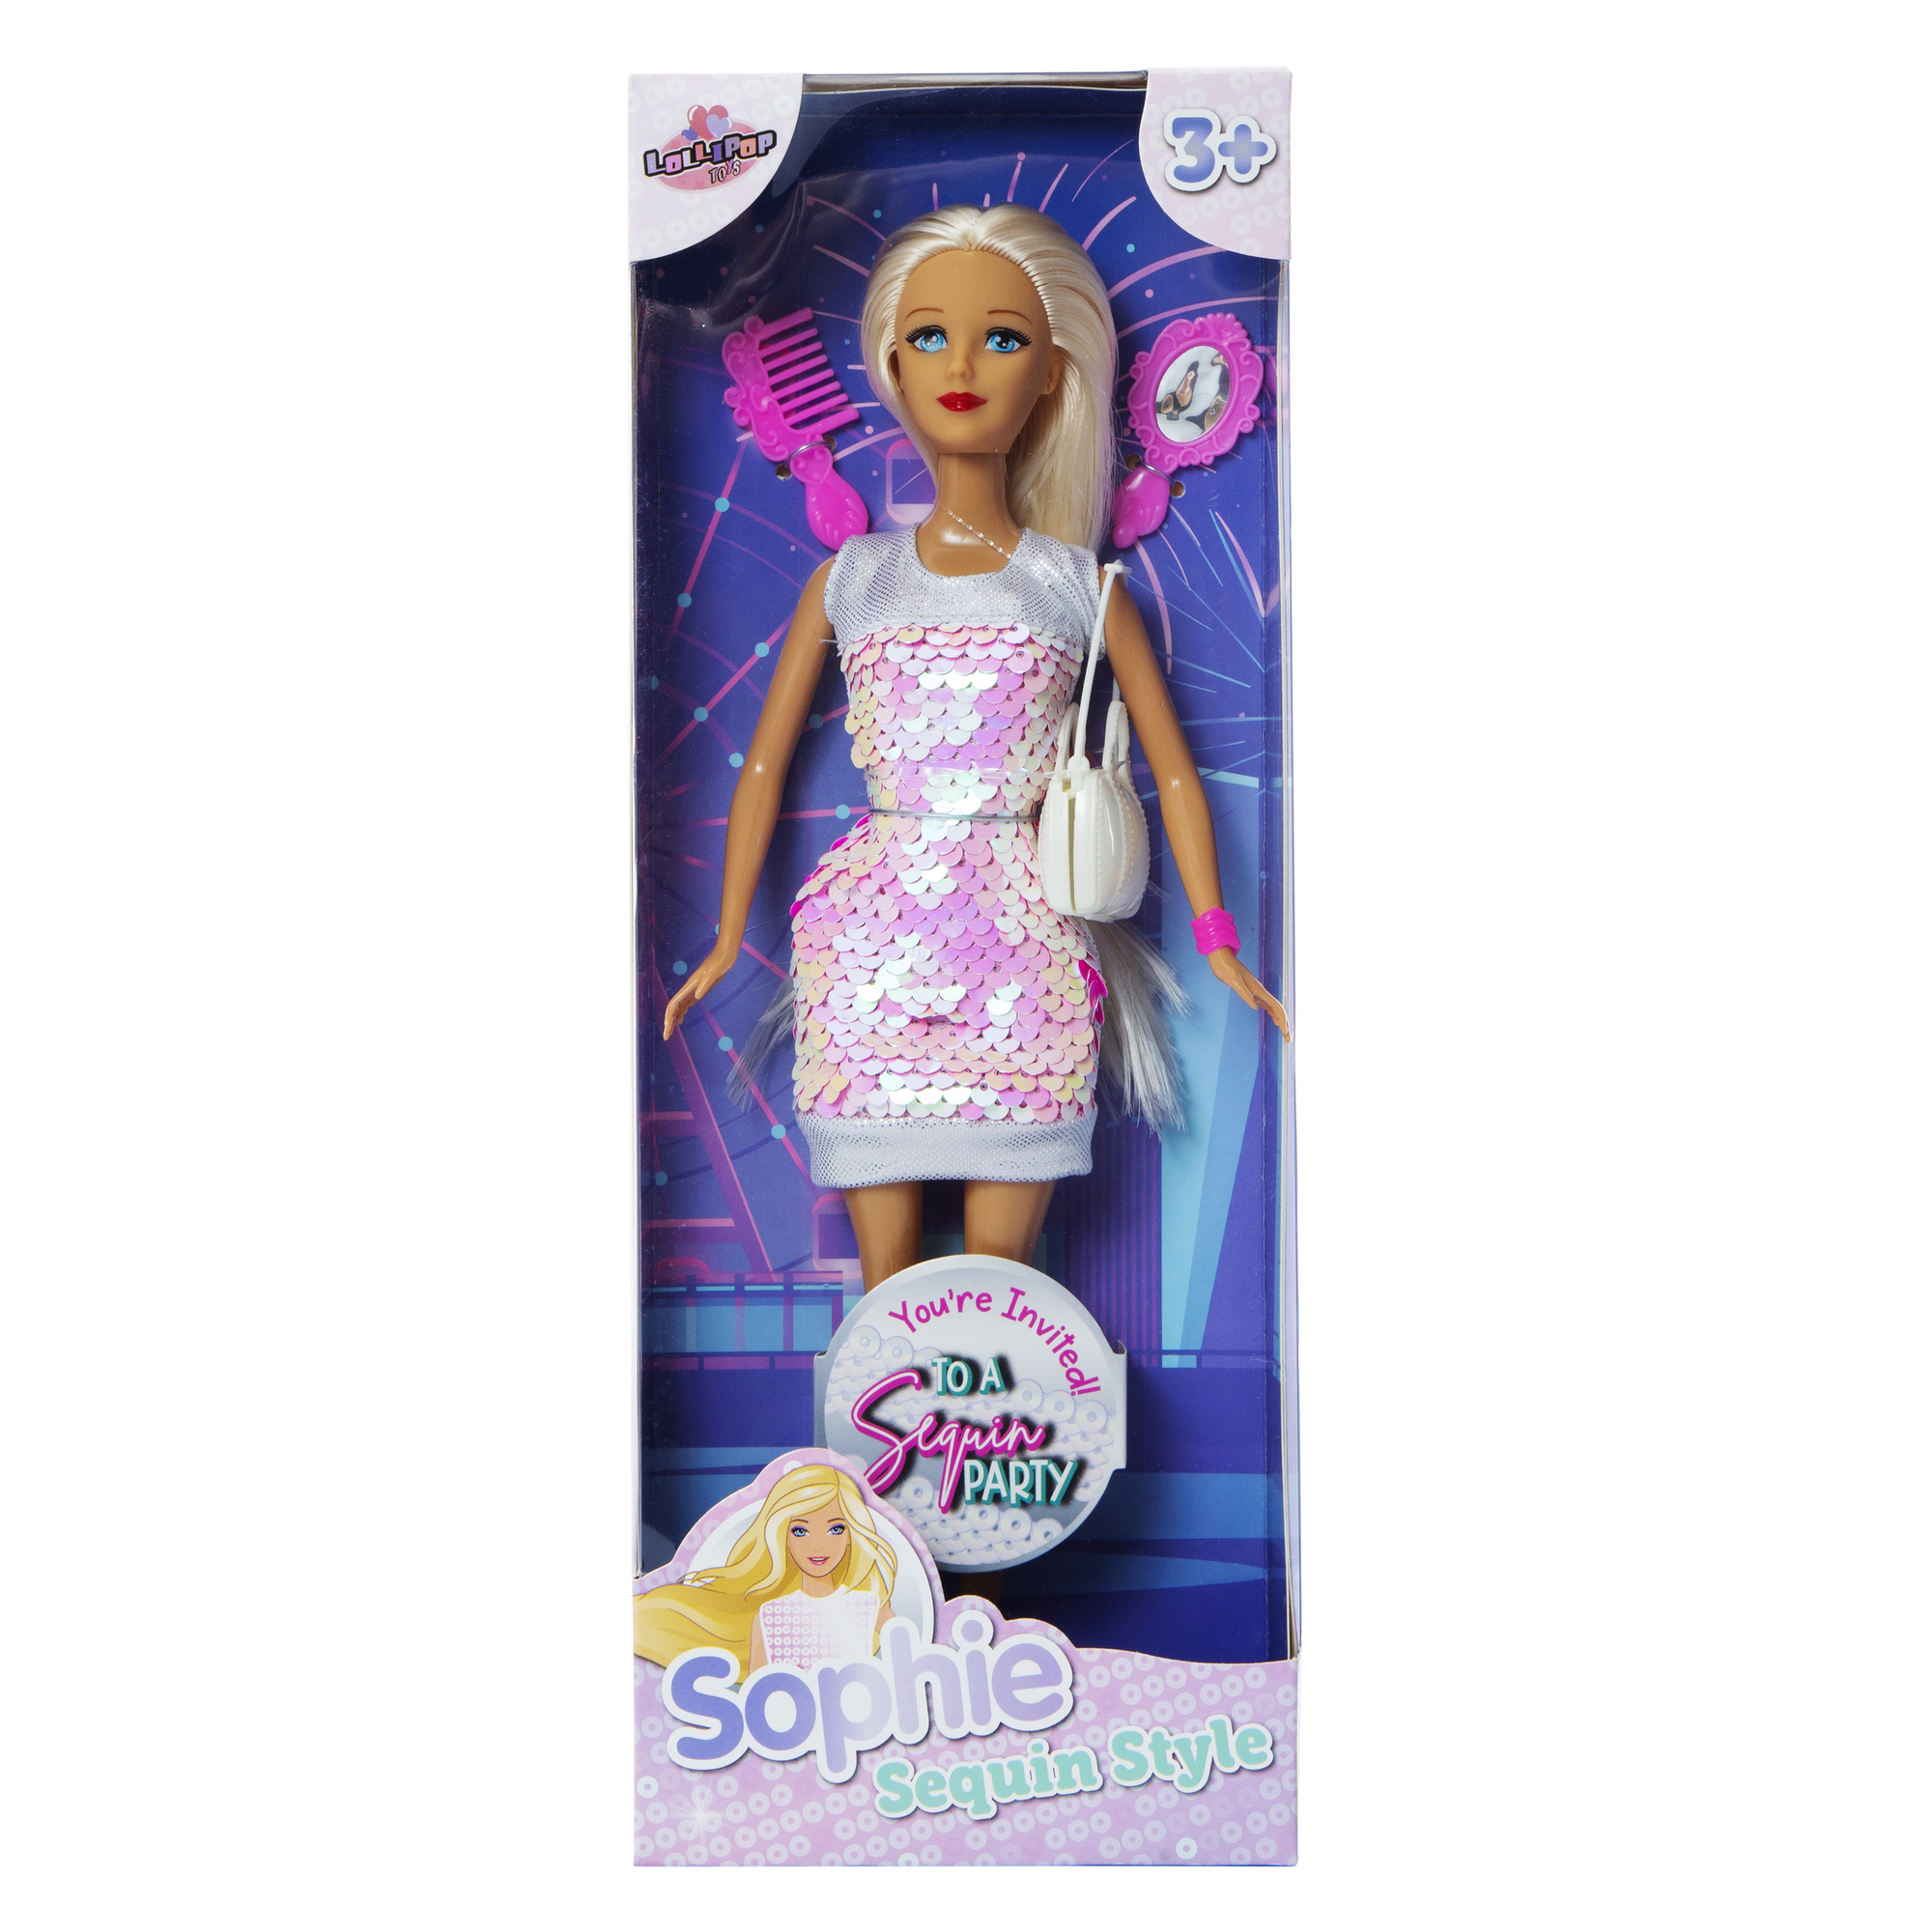 sophie sequin style doll